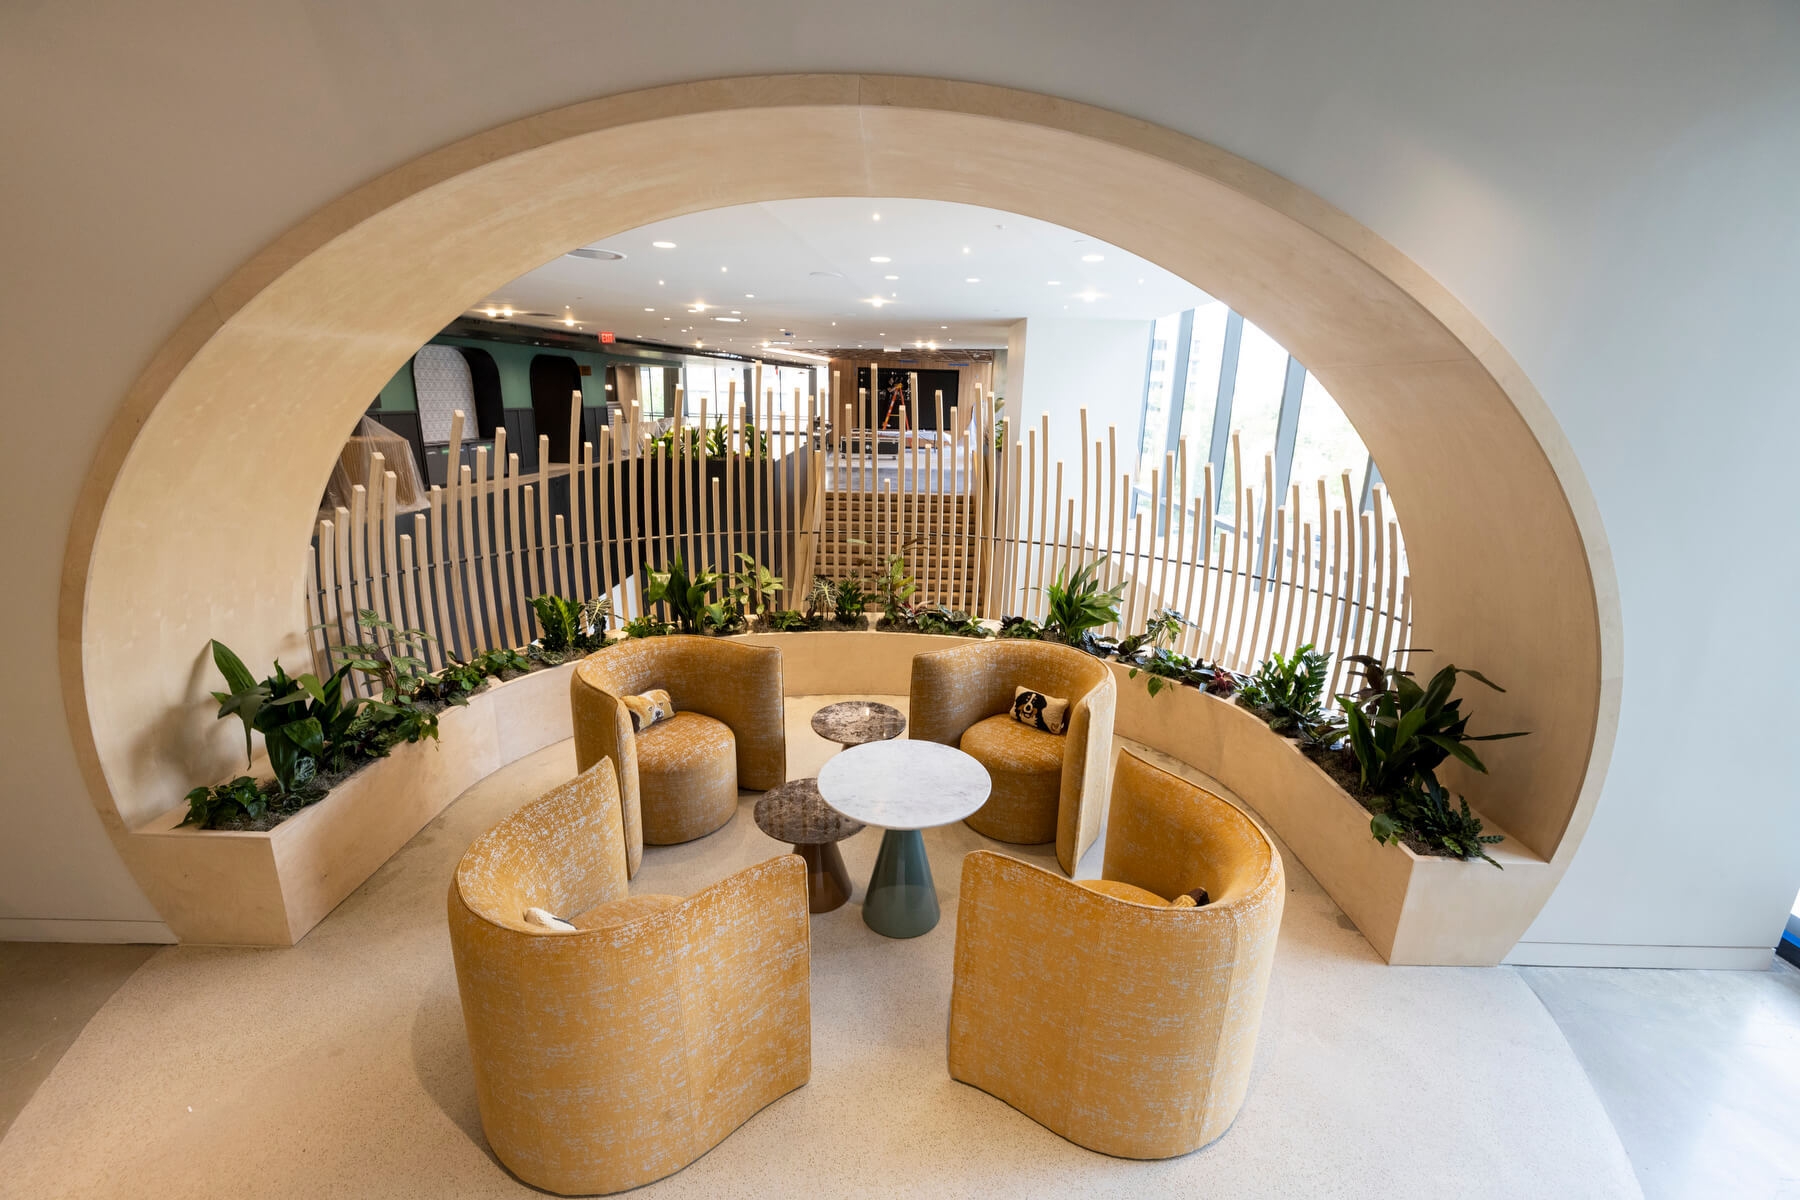 An image of a round bench seating area with plants and elaborate woodwork